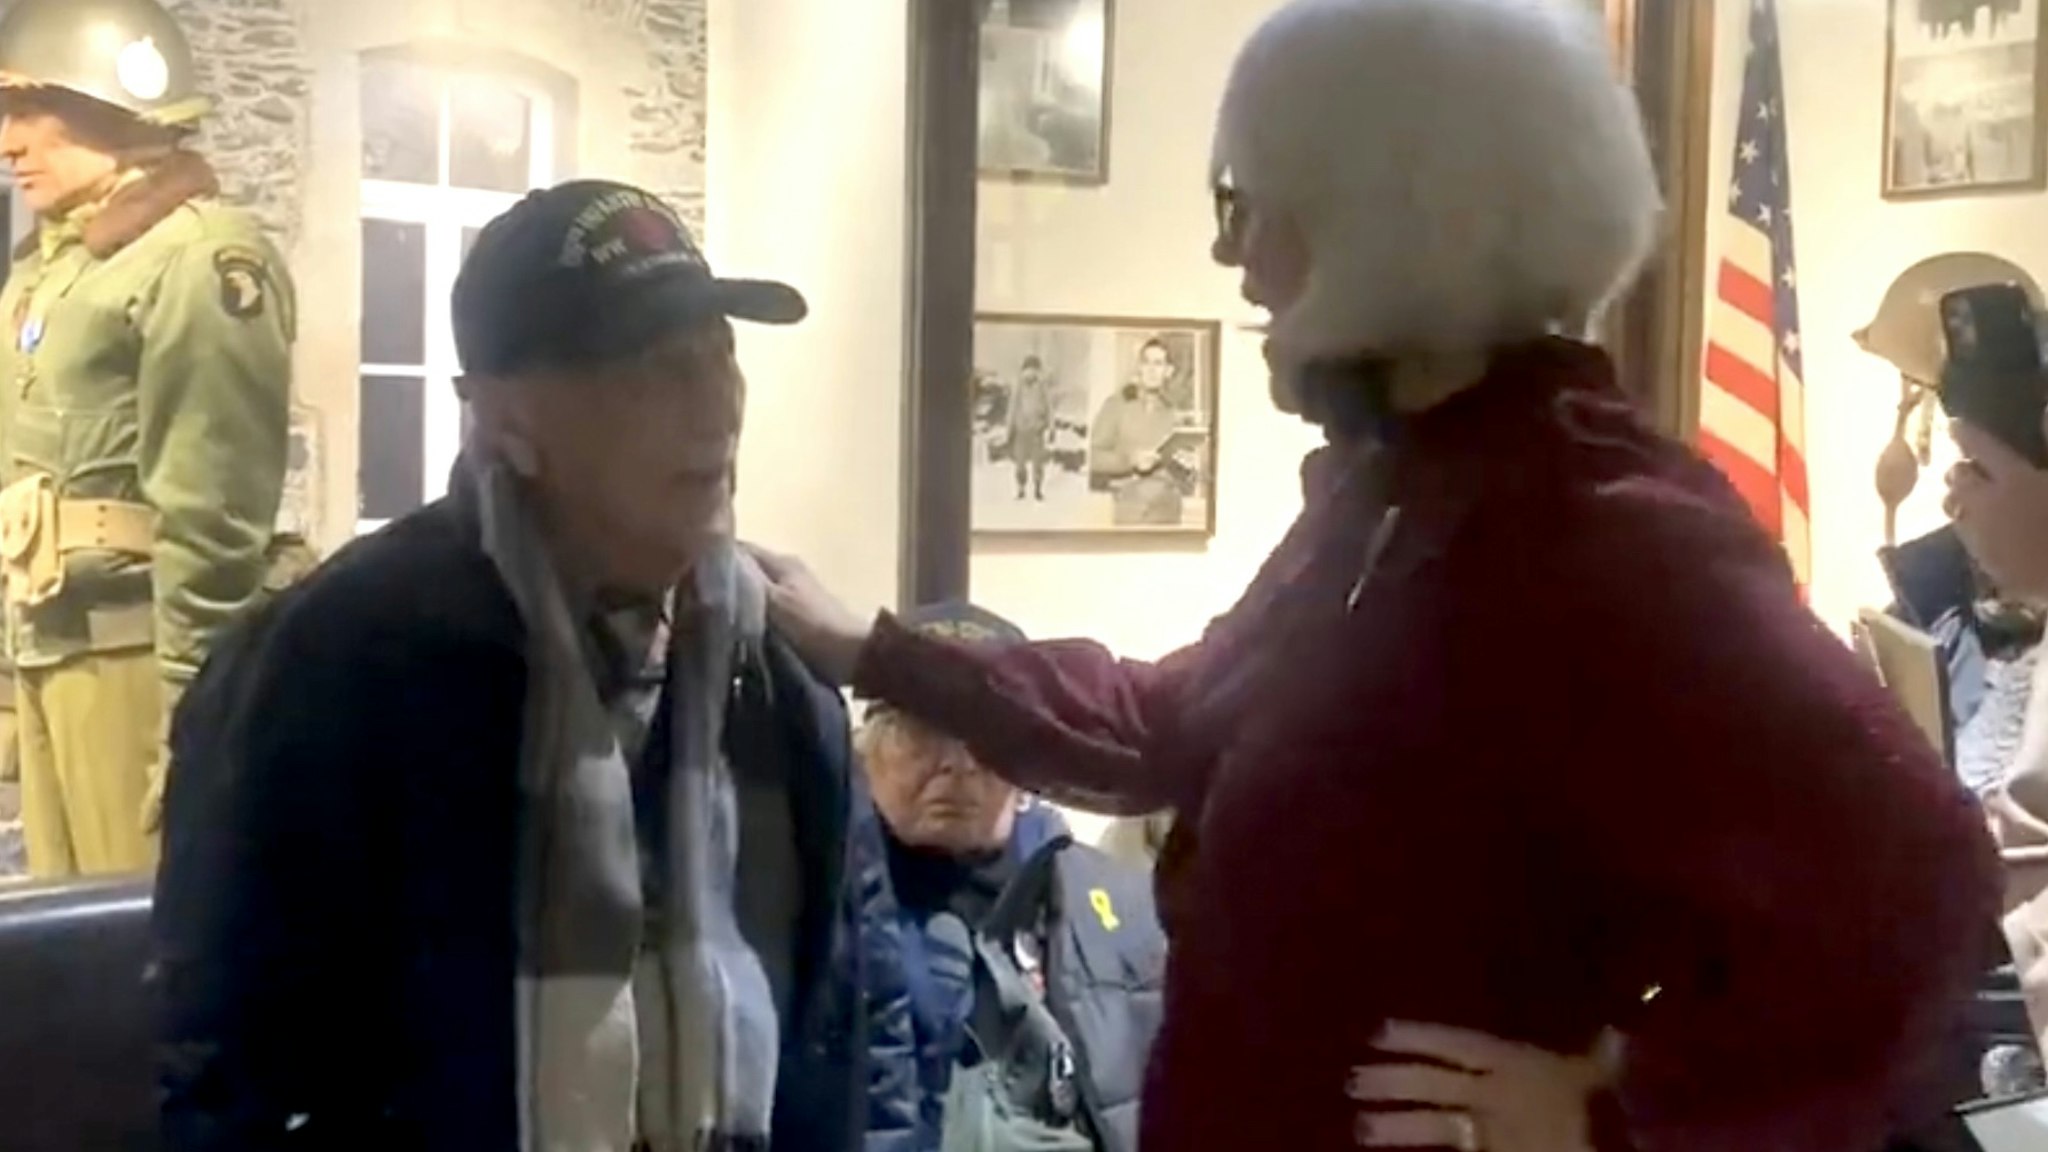 WWII veteran Bennett Stampes and Helen Patton at the 101st Airborne Museum in Bastogne, Belgium. 12/12/2021